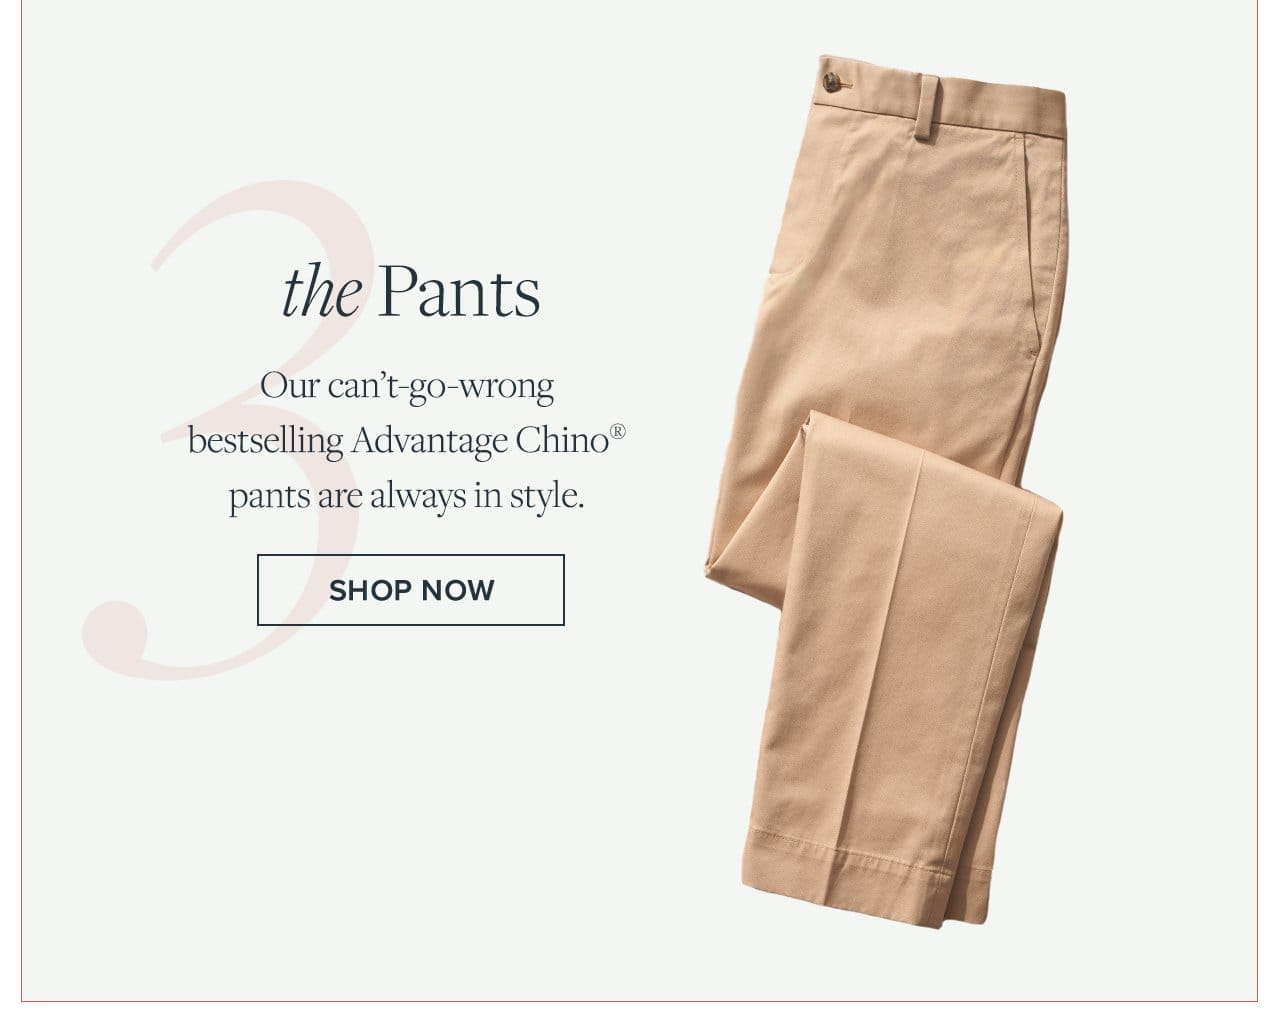 3) the Pants Our can't-go-wrong bestselling Advantage Chino pants are always in style. Shop Now